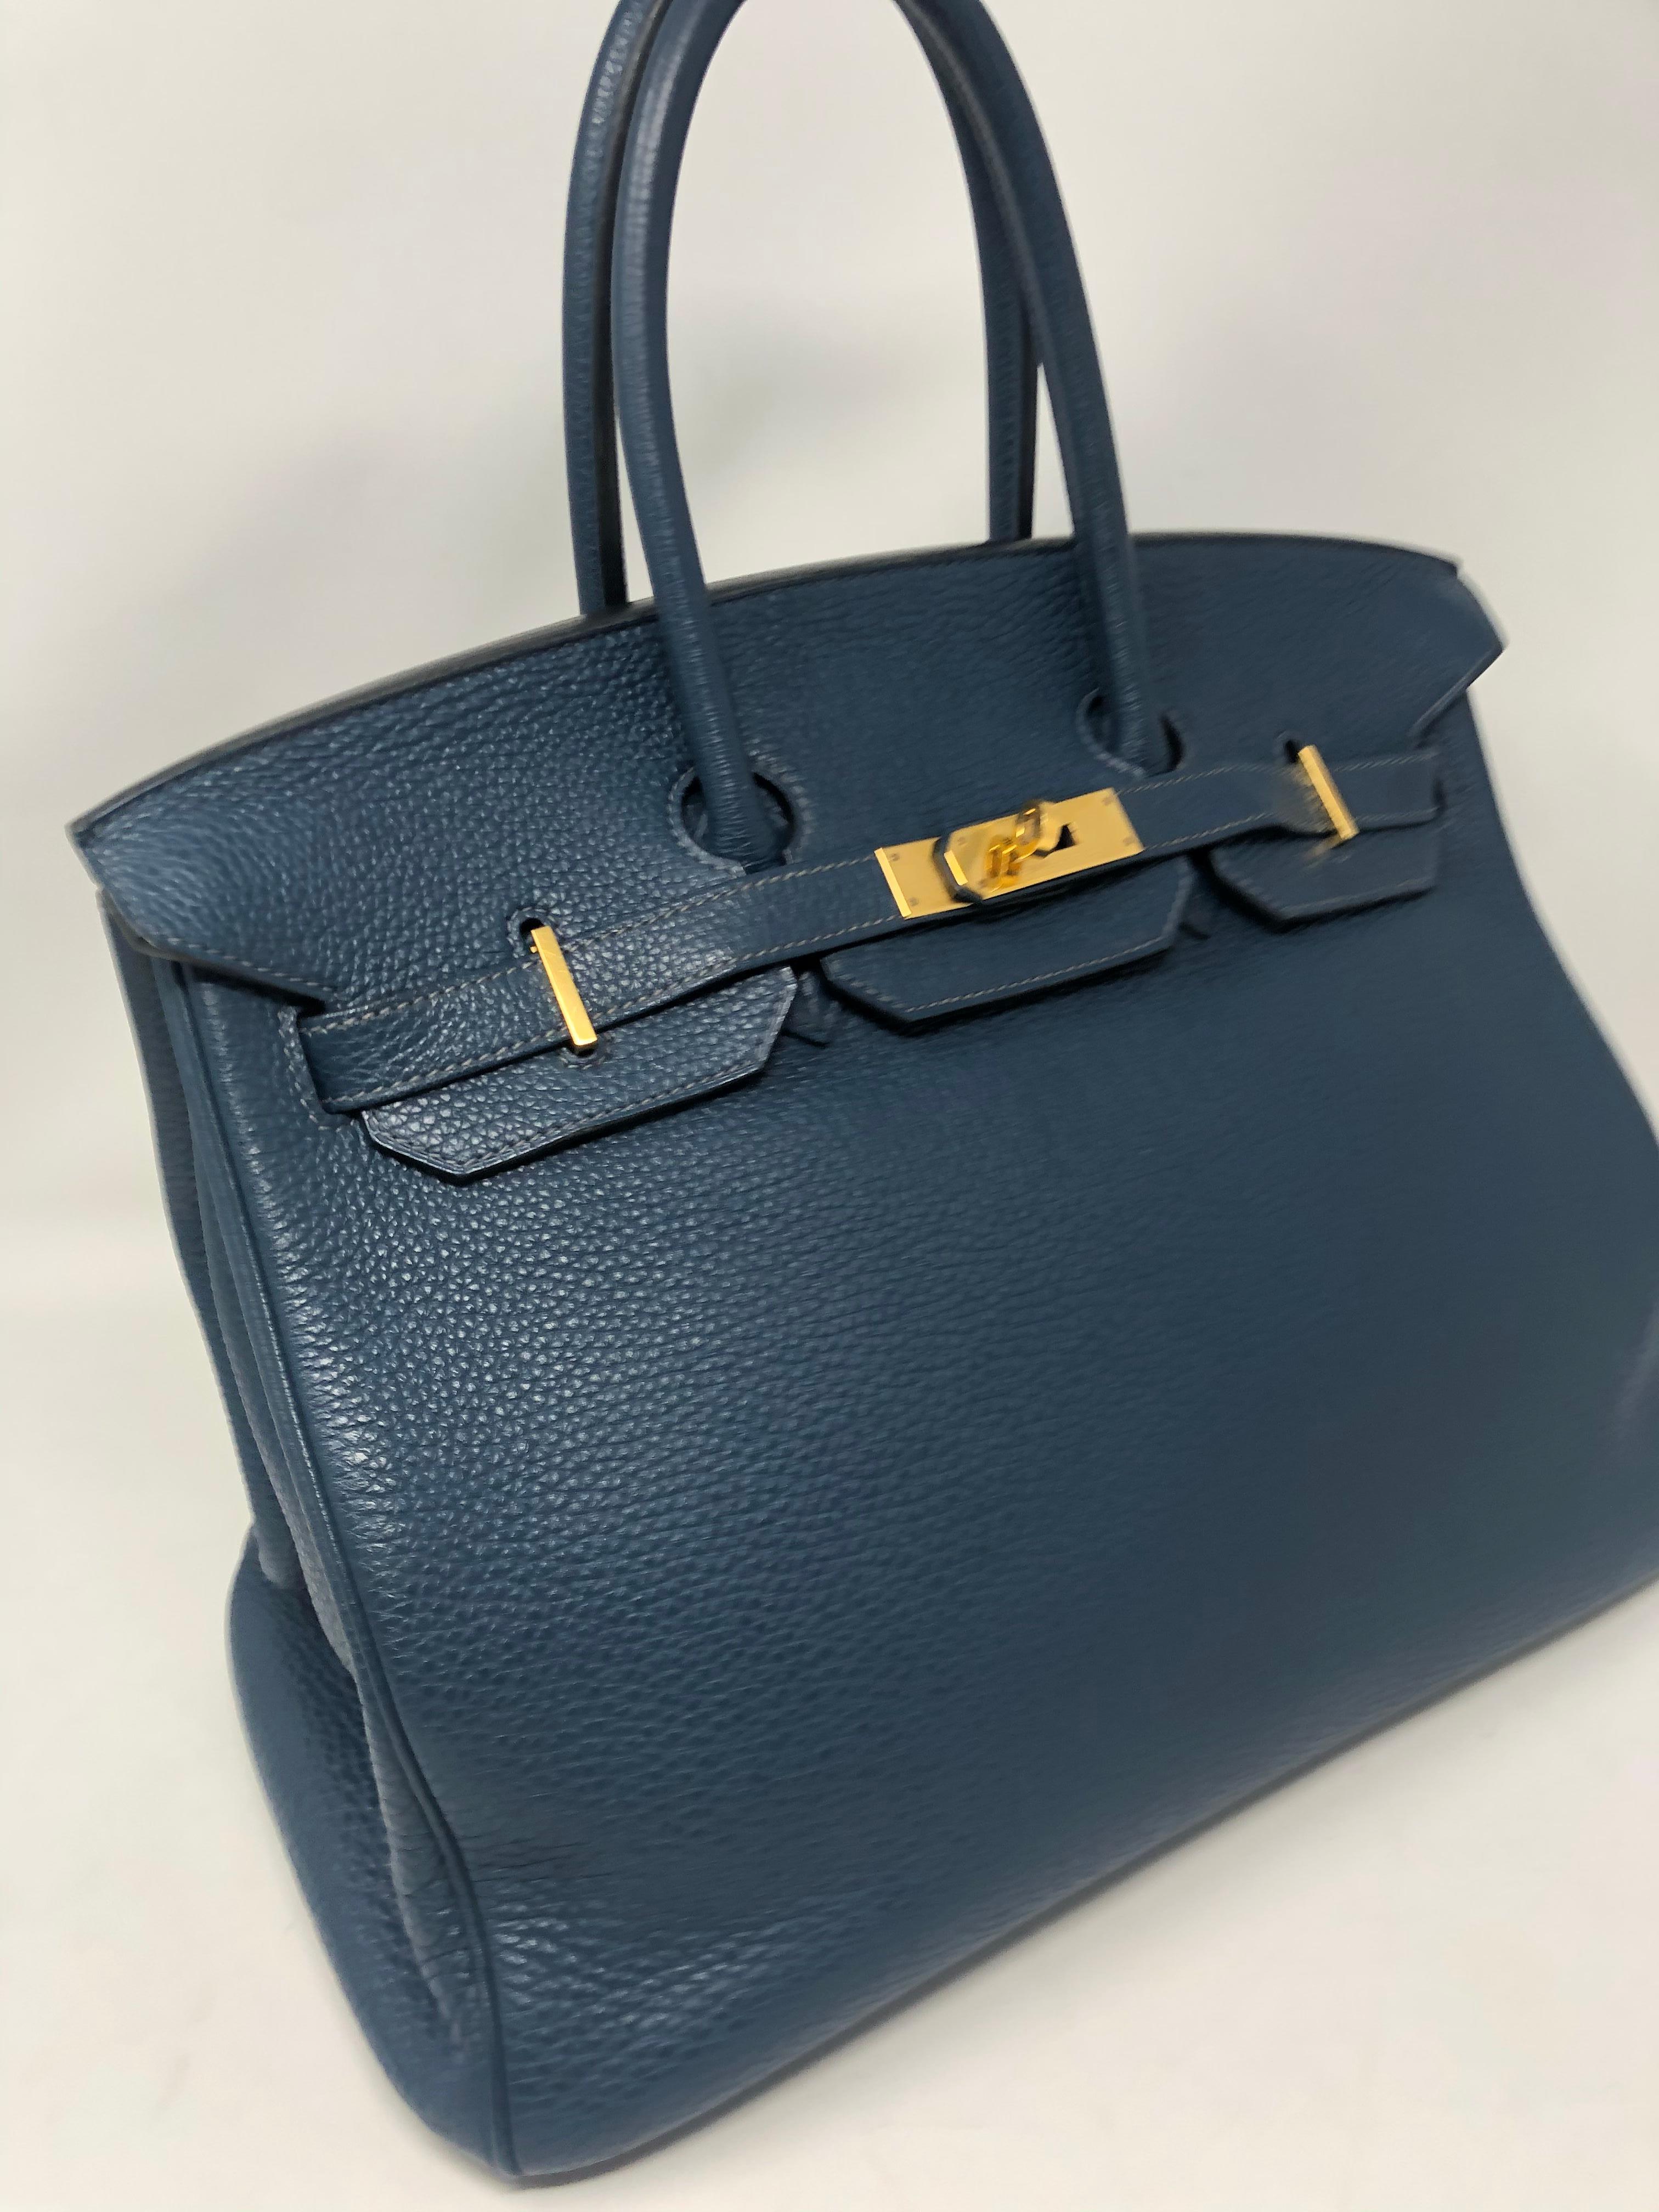 Hermes Birkin Blue De Malte Togo Leather Bag. Gold hardware. Size 35. Classic size. Beautiful sapphire blue color. Rare color and good condition. Stamp N square. From 2010. No corner wear. Neutral blue color will go with almost anything. Guaranteed